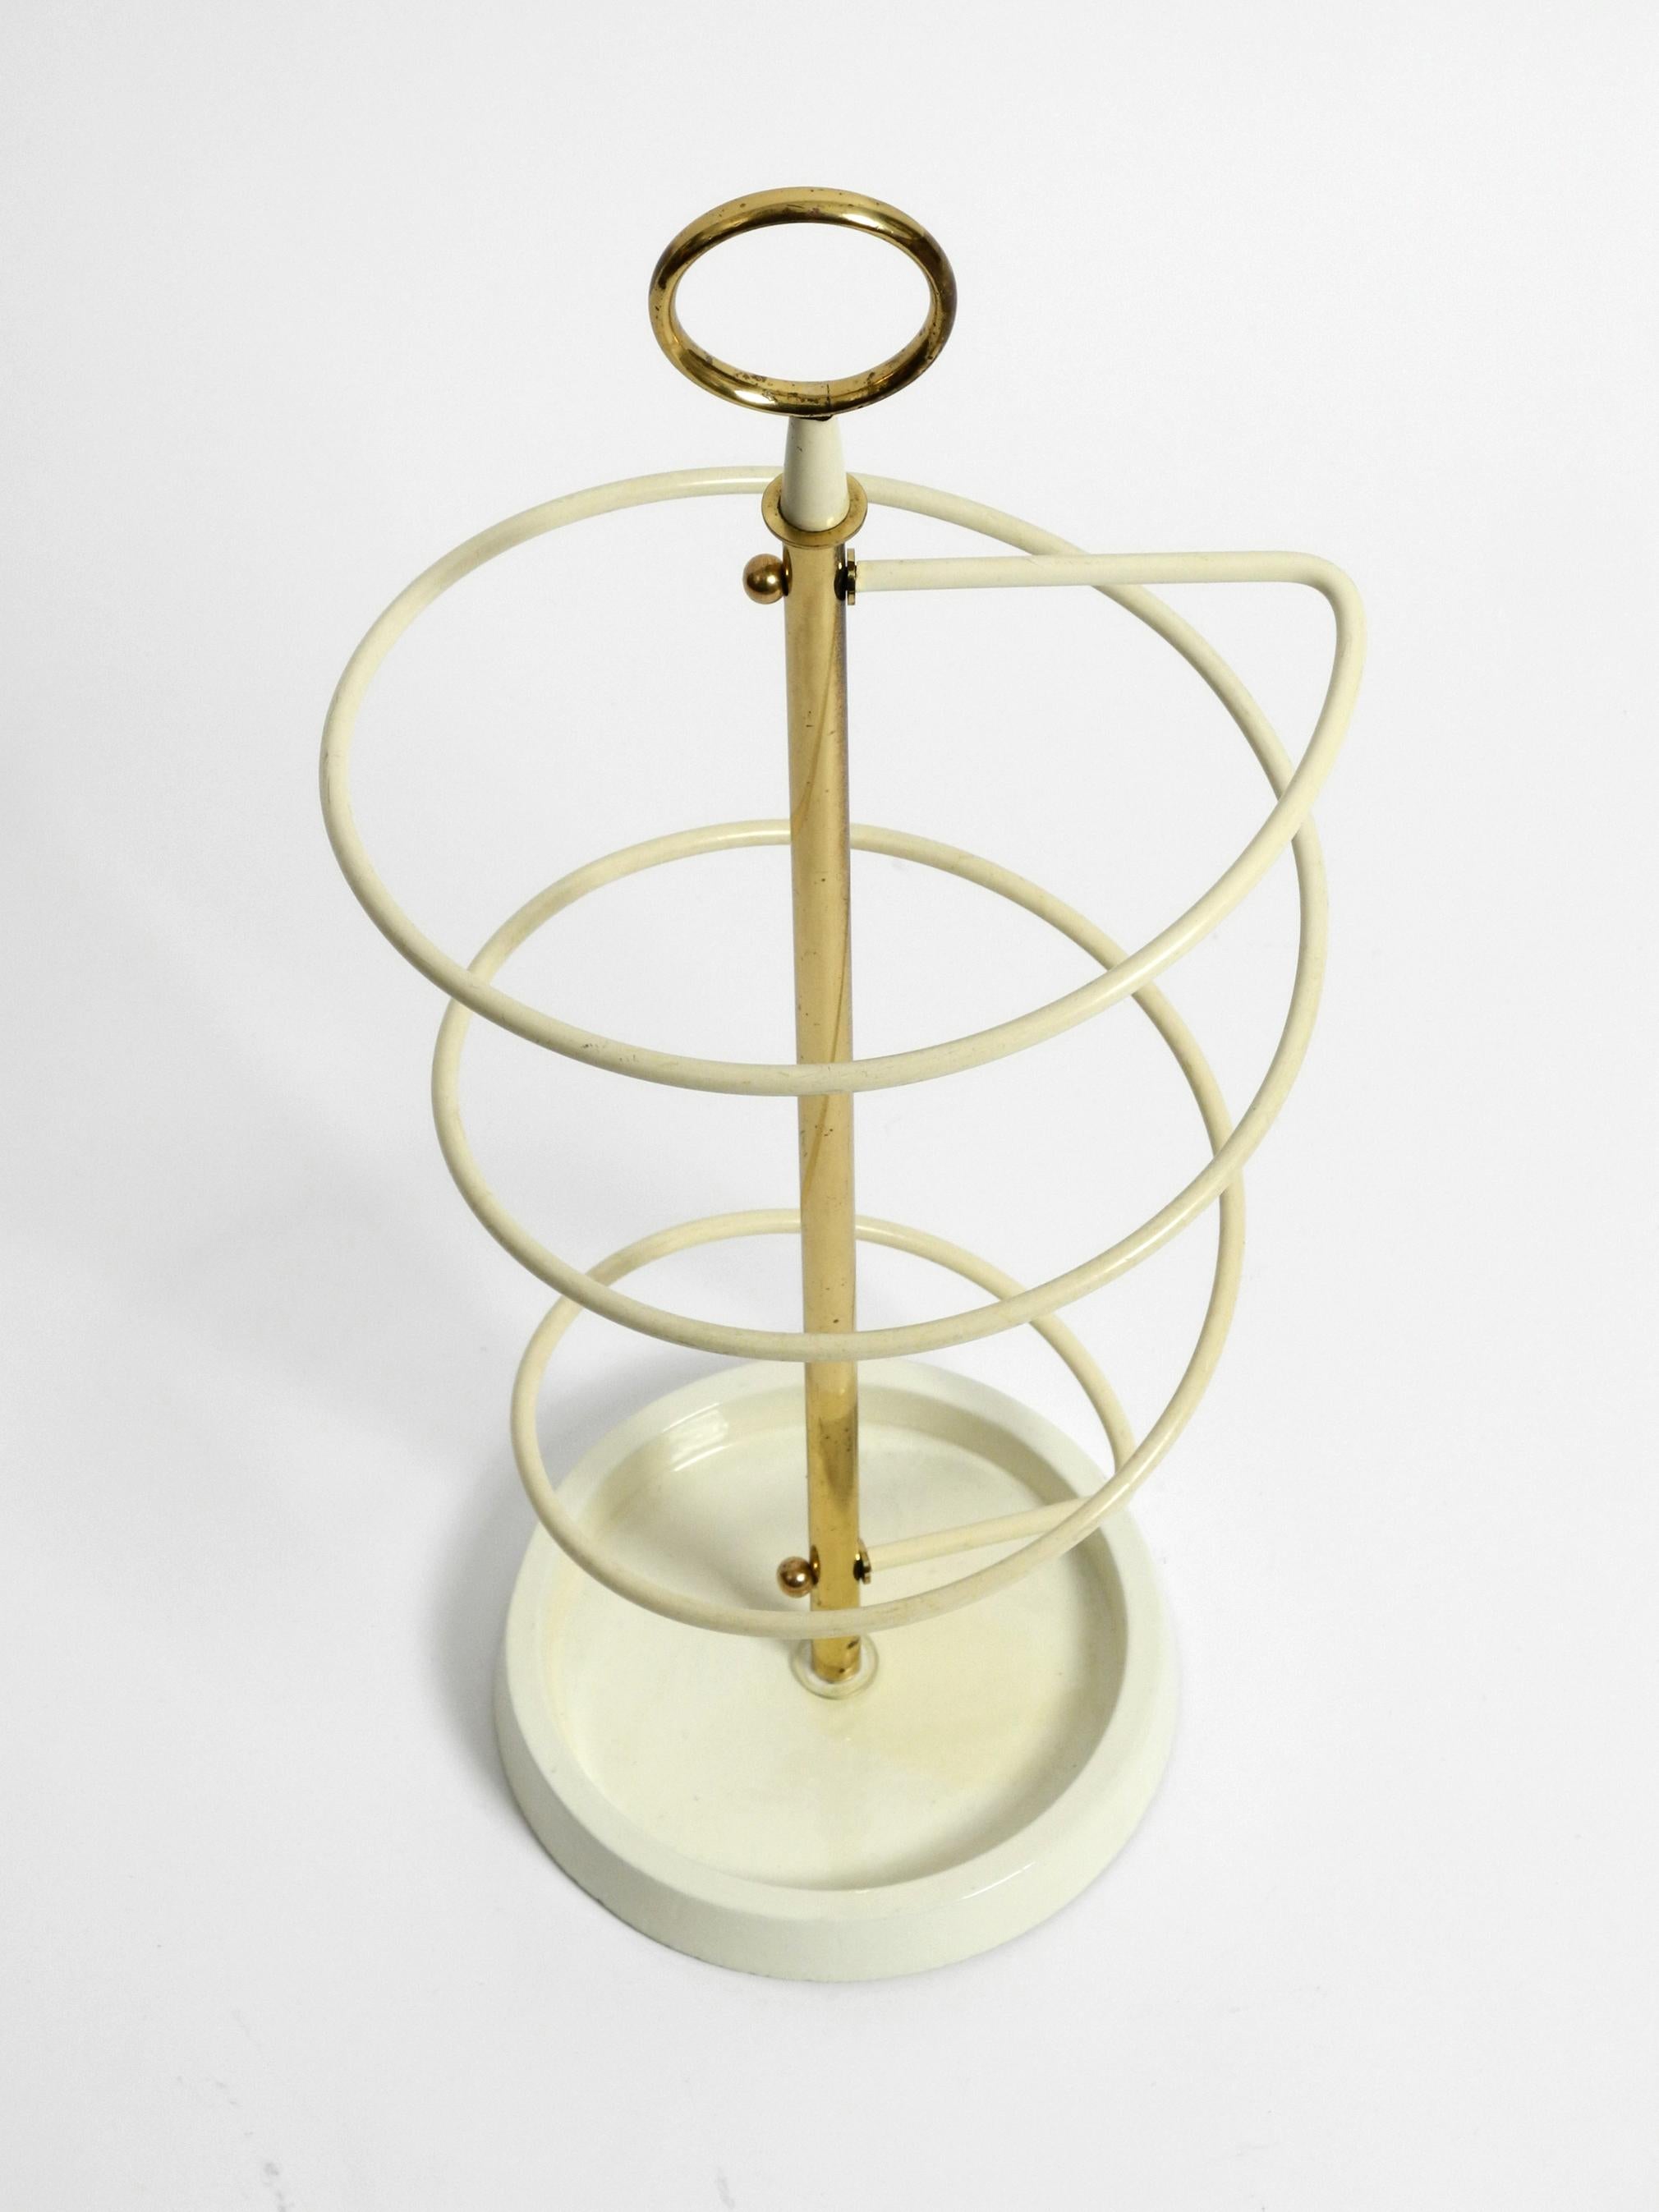 German Extraordinary Rare Mid-Century Modern Umbrella Stand in String Helix Design For Sale